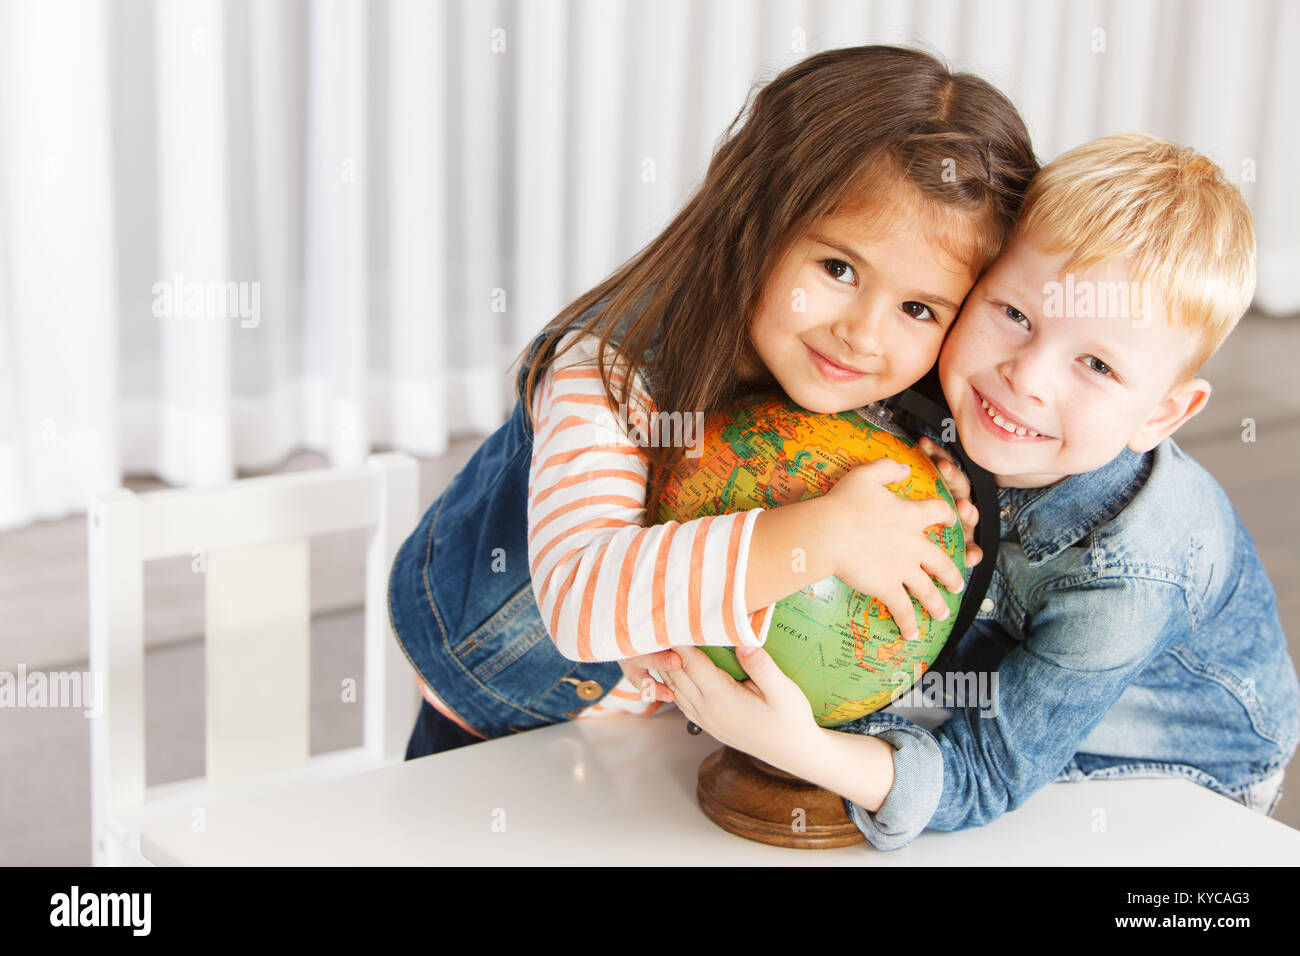 Beautiful 5 years-old little children embracing the globe Stock Photo